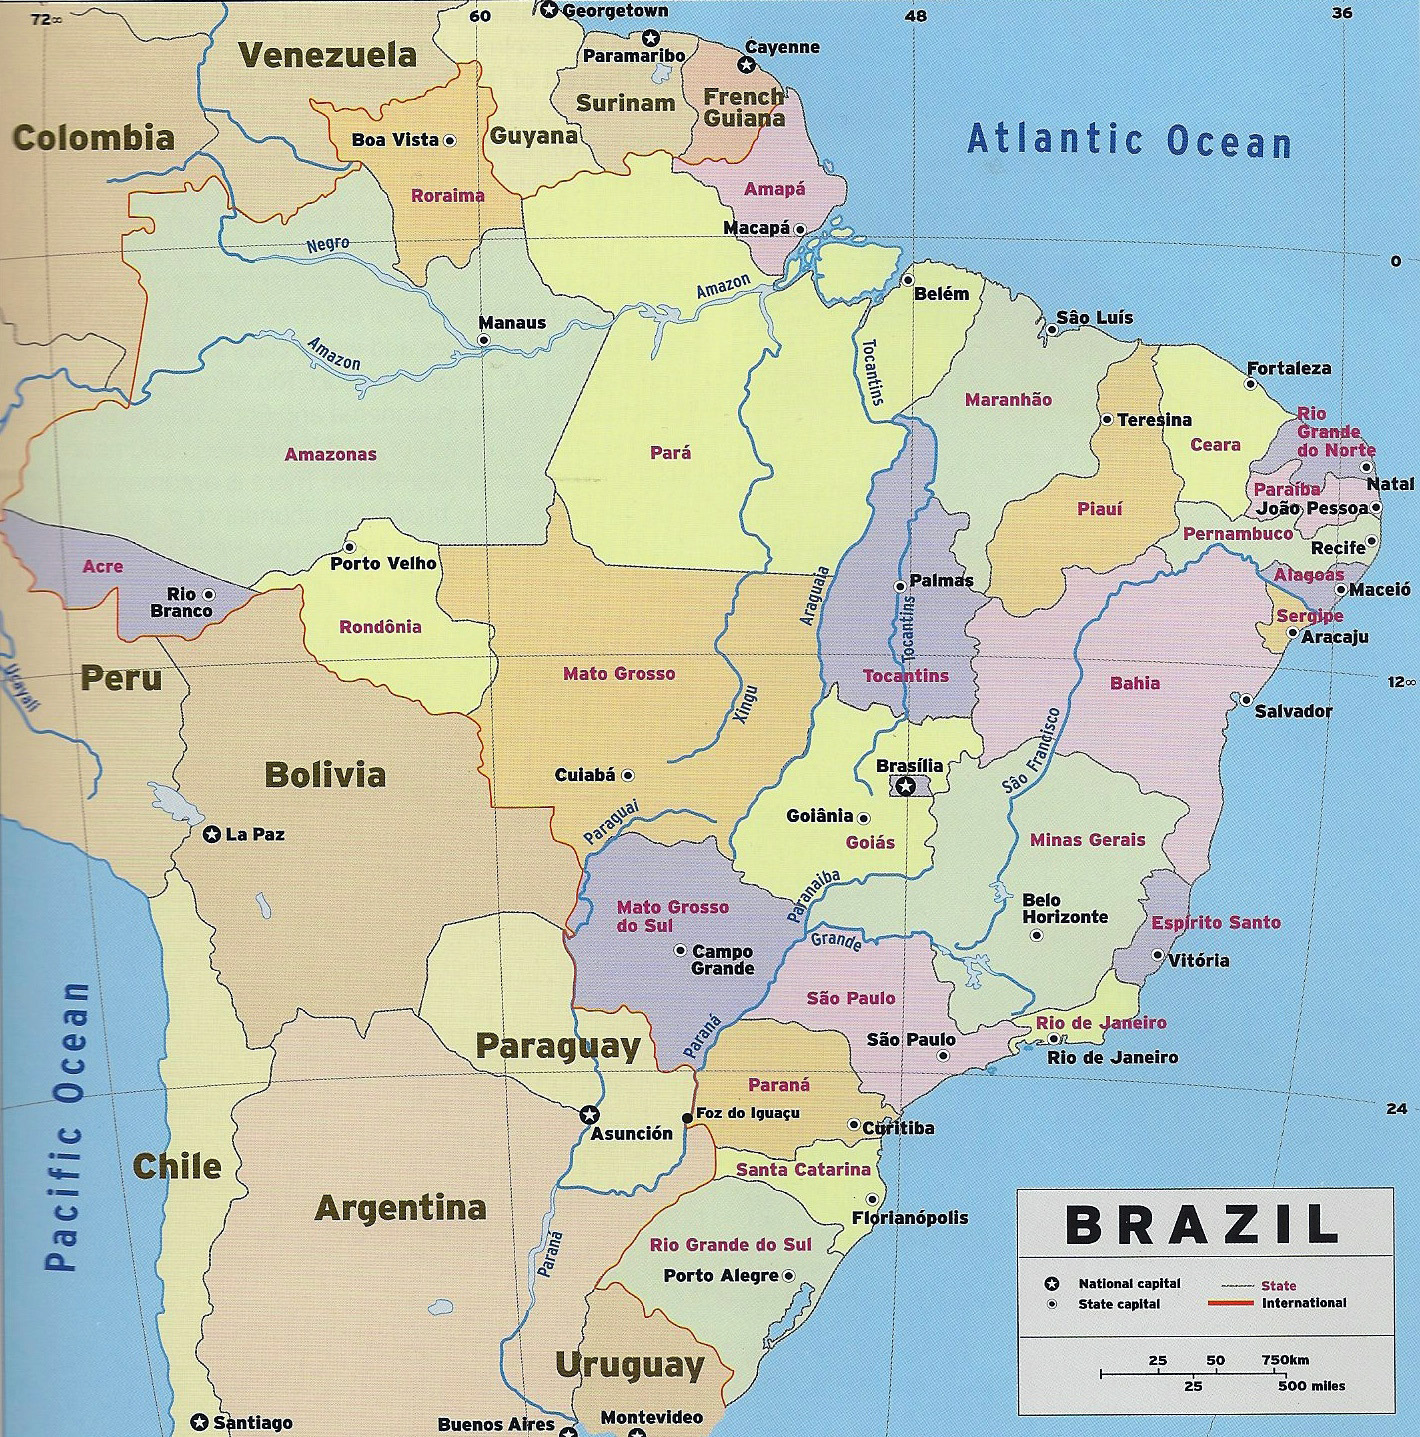 Political Map Of Brazil With States Large Detailed Political And Administrative Map Of Brazil With National  Capital And State Capitals | Brazil | South America | Mapsland | Maps Of  The World